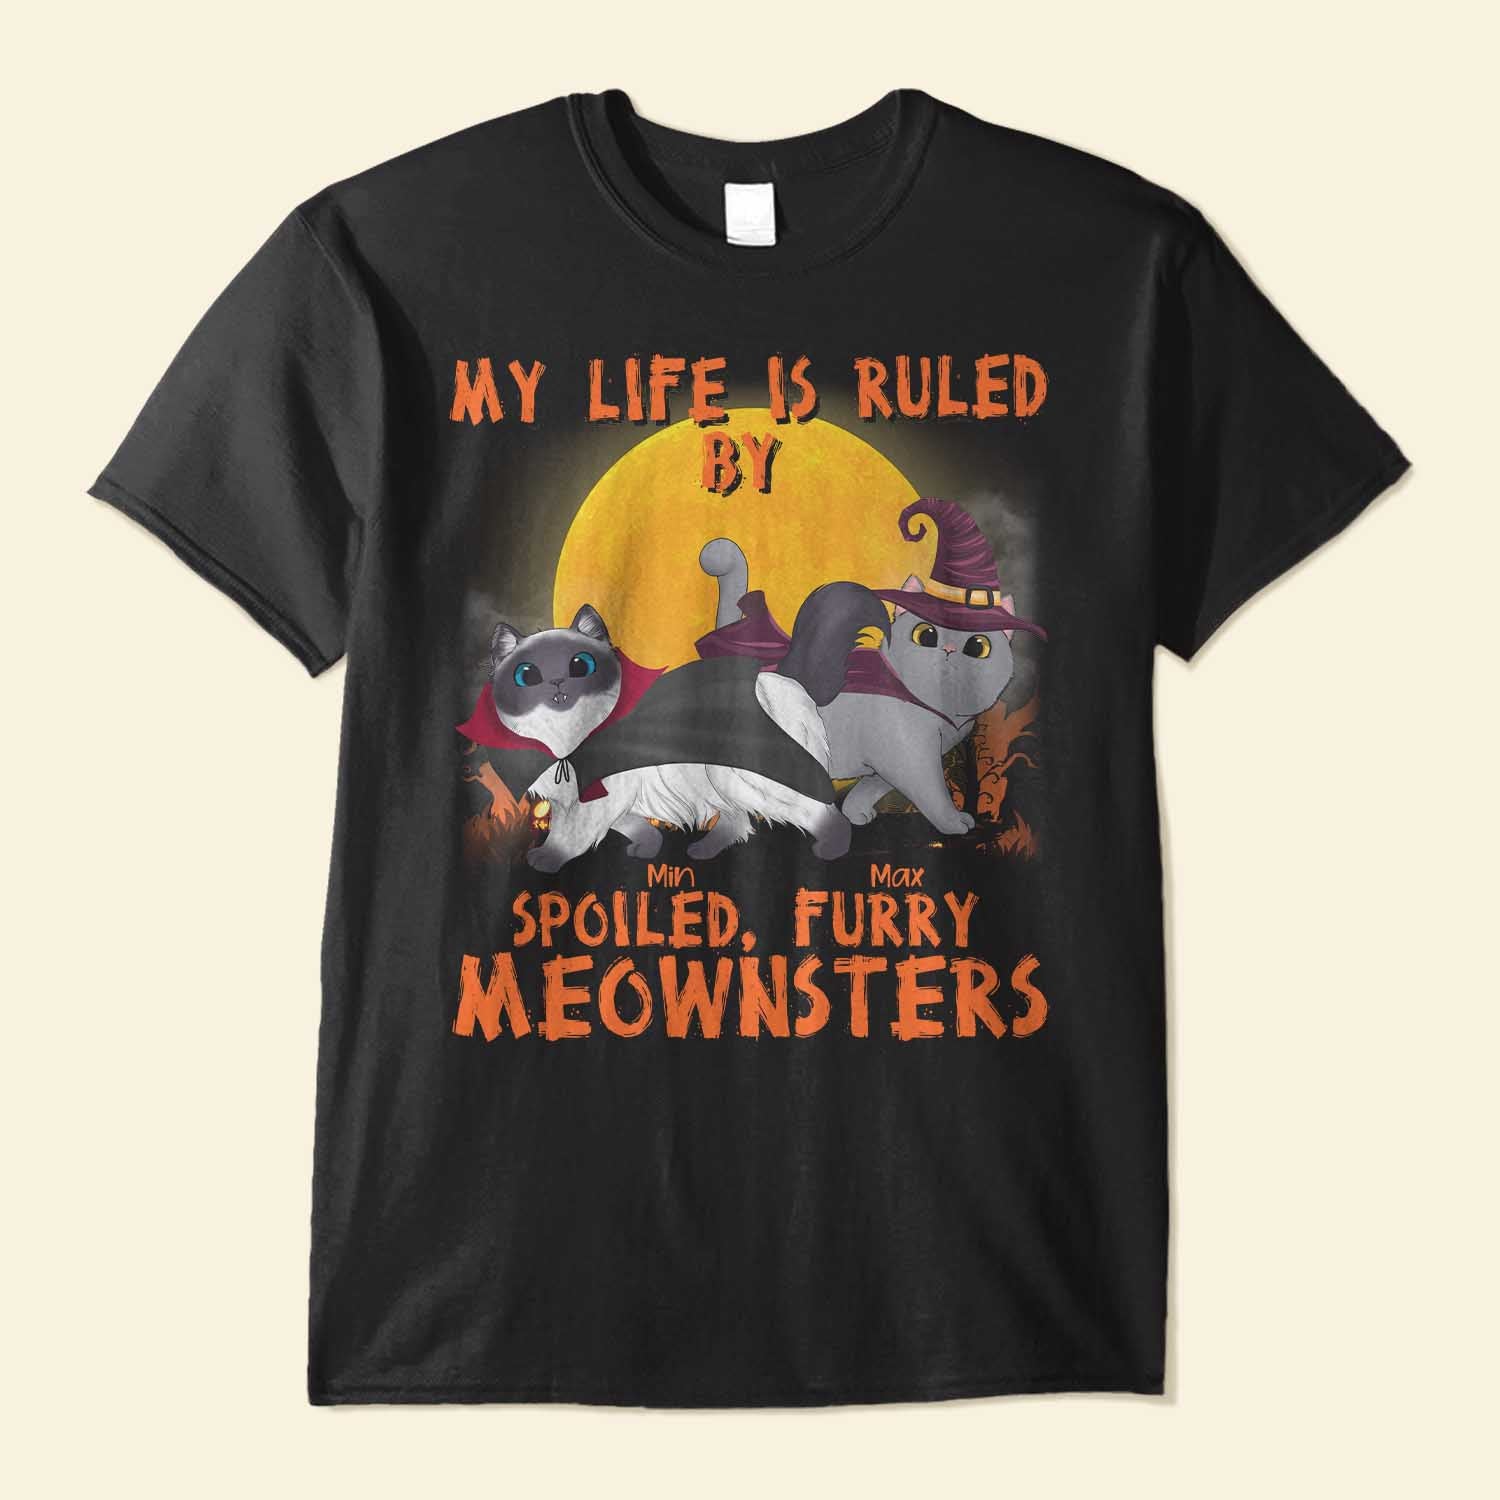 Mother, Father Of Meownsters - Personalized Shirt - Halloween Gift For Cat Lovers - Walking Cat